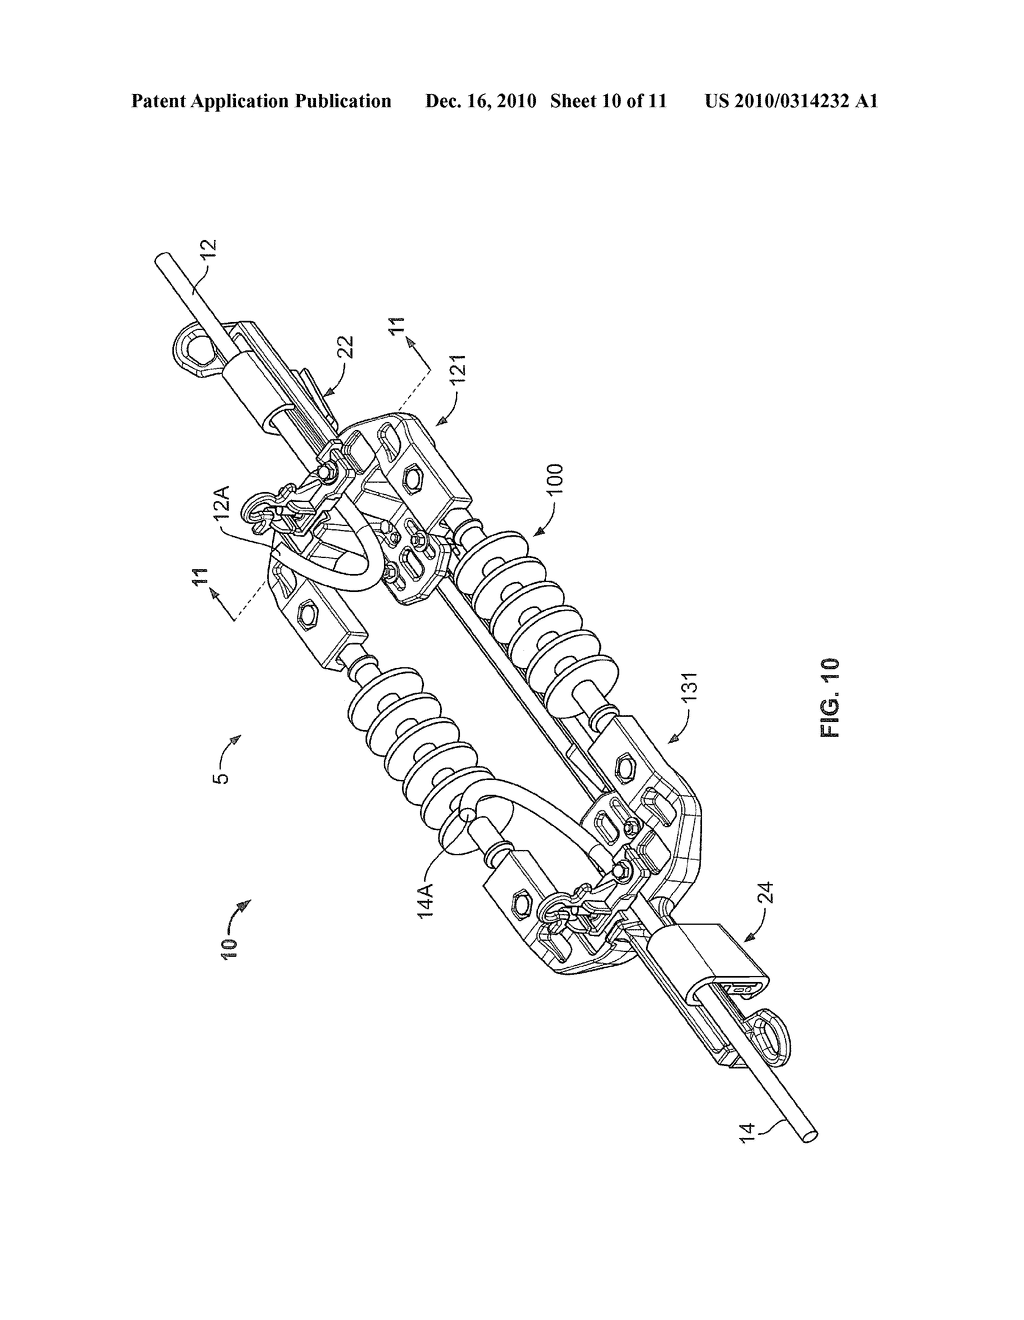 CABLE TERMINATION SYSTEMS AND ISOLATING APPARATUS FOR ELECTRICAL POWER TRANSMISSION CONDUCTORS AND METHODS USING THE SAME - diagram, schematic, and image 11